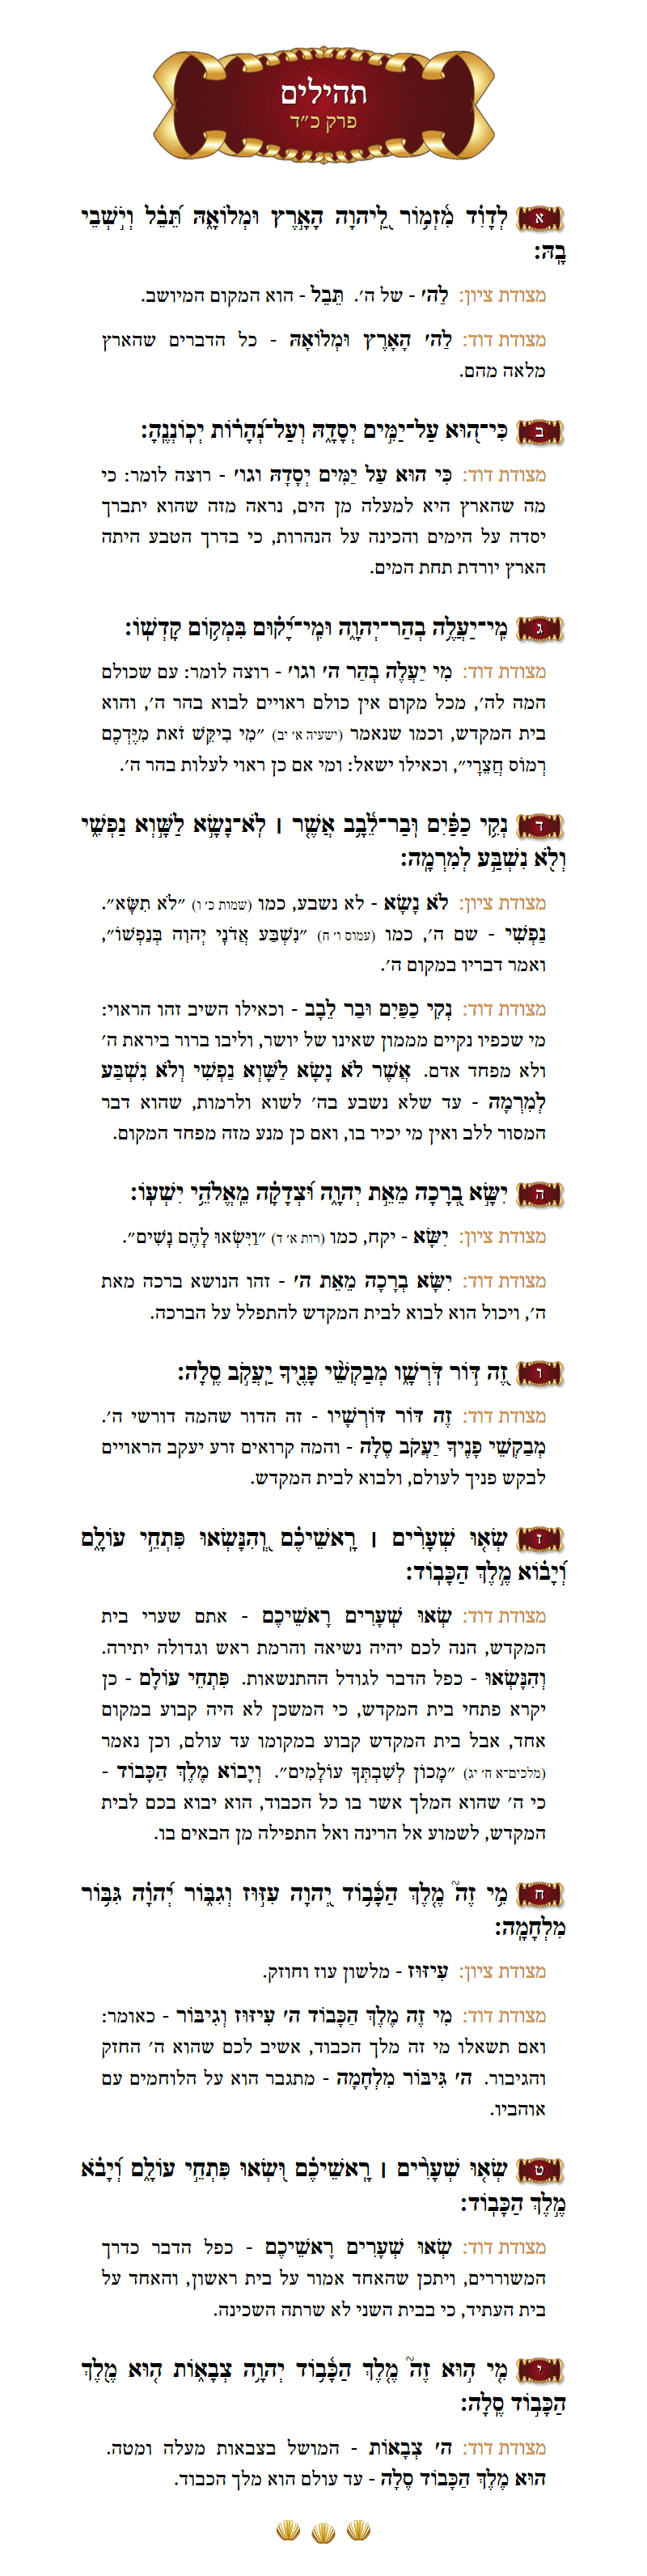 Sefer Tehillim Chapter 24 with commentary